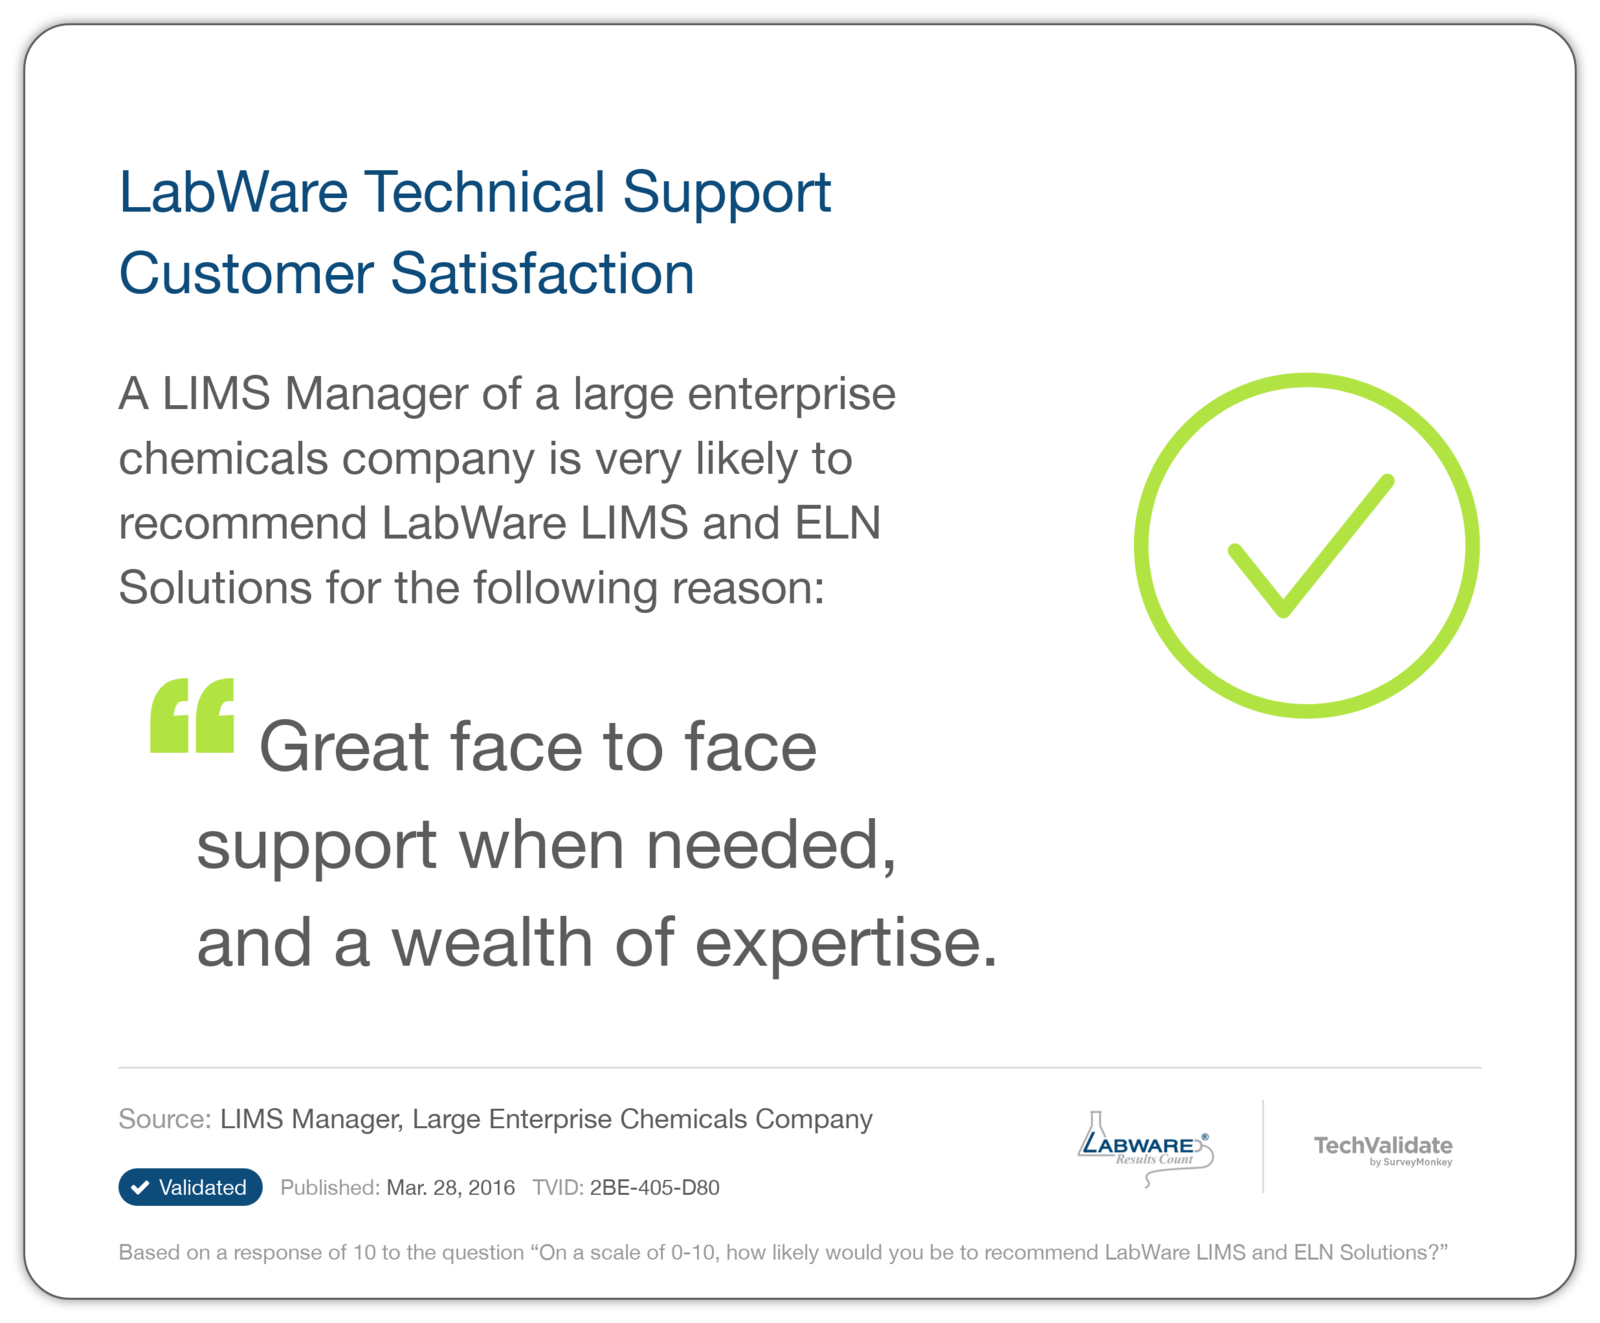 LabWare Technical Support Customer Satisfaction